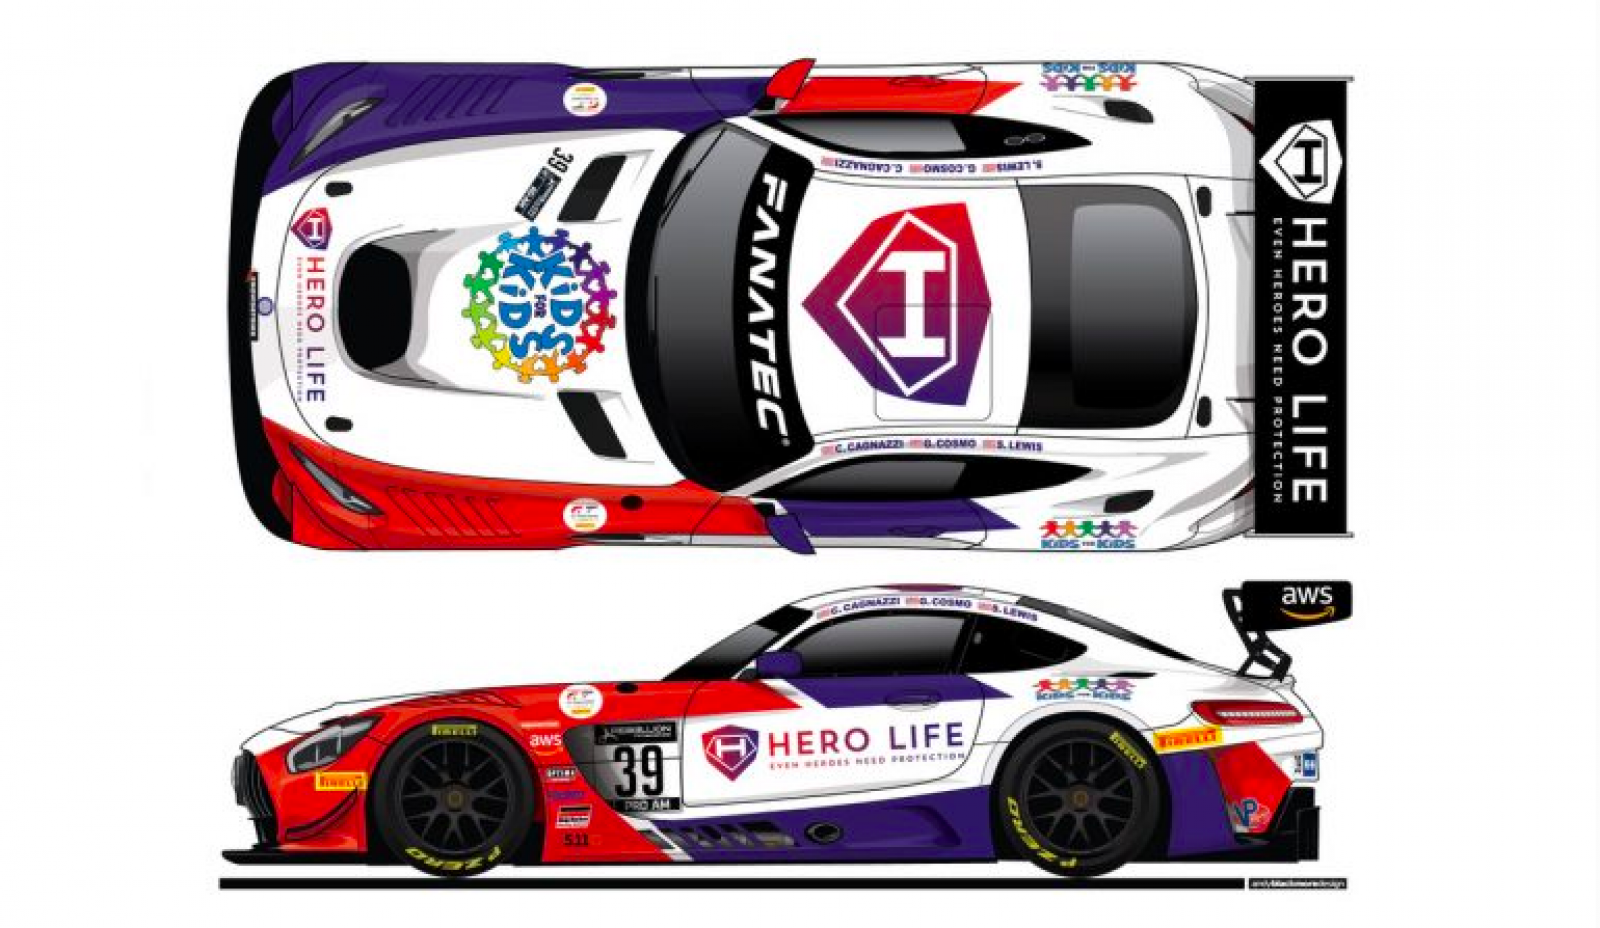 Hero Life Partners with Cagnazzi, Cosmo and Lewis for Indianapolis 8 Hours